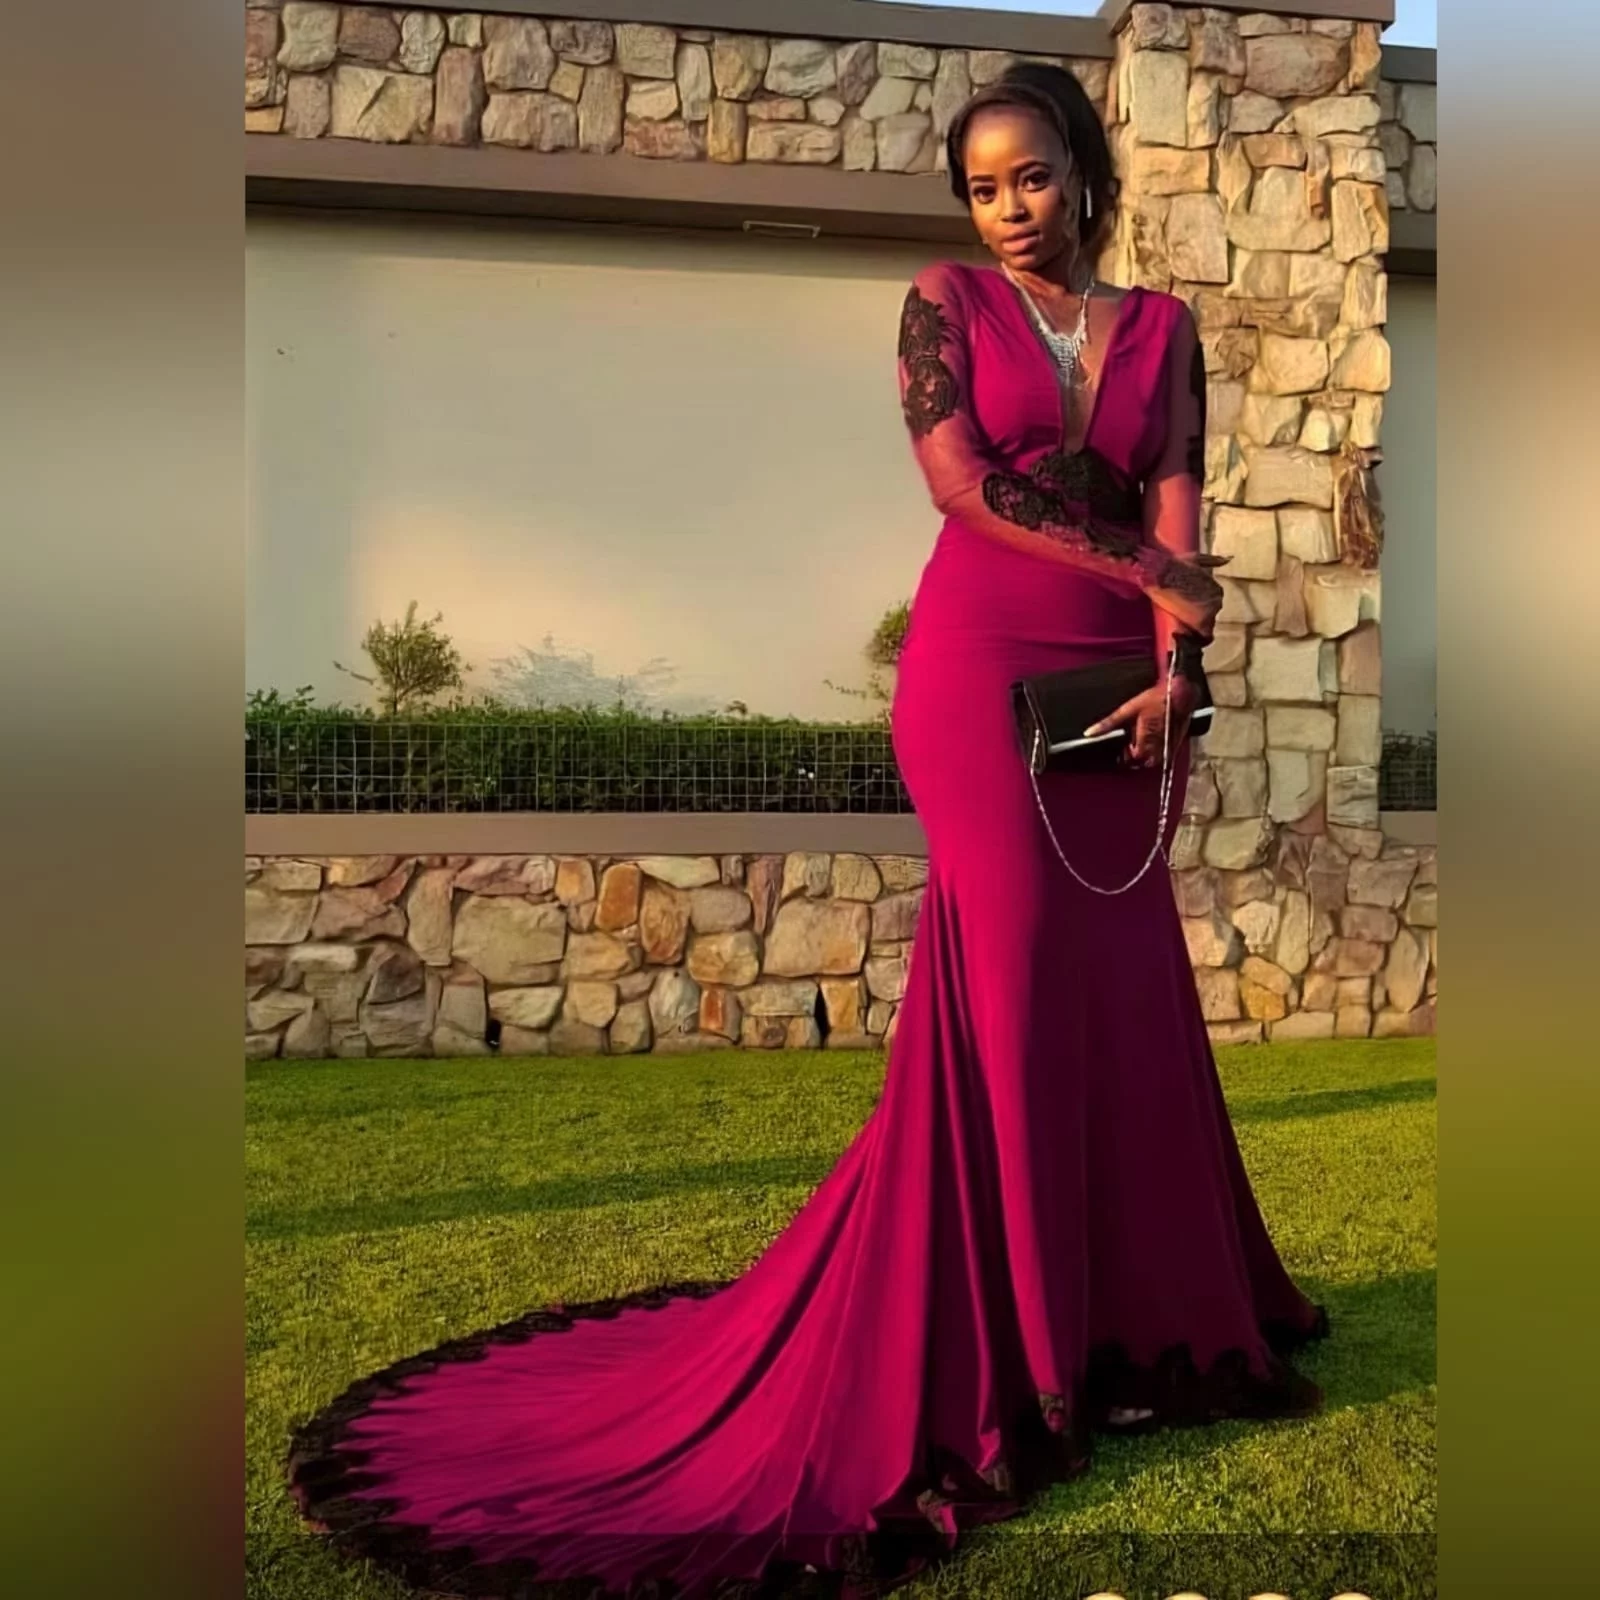 Soft mermaid burgundy matric farewell dress detailed with black lace 6 palesa looked gorgeous with my creation. A soft mermaid burgundy matric farewell dress detailed with black lace. With a sheer open back and long sheer sleeves detailed with black lace.